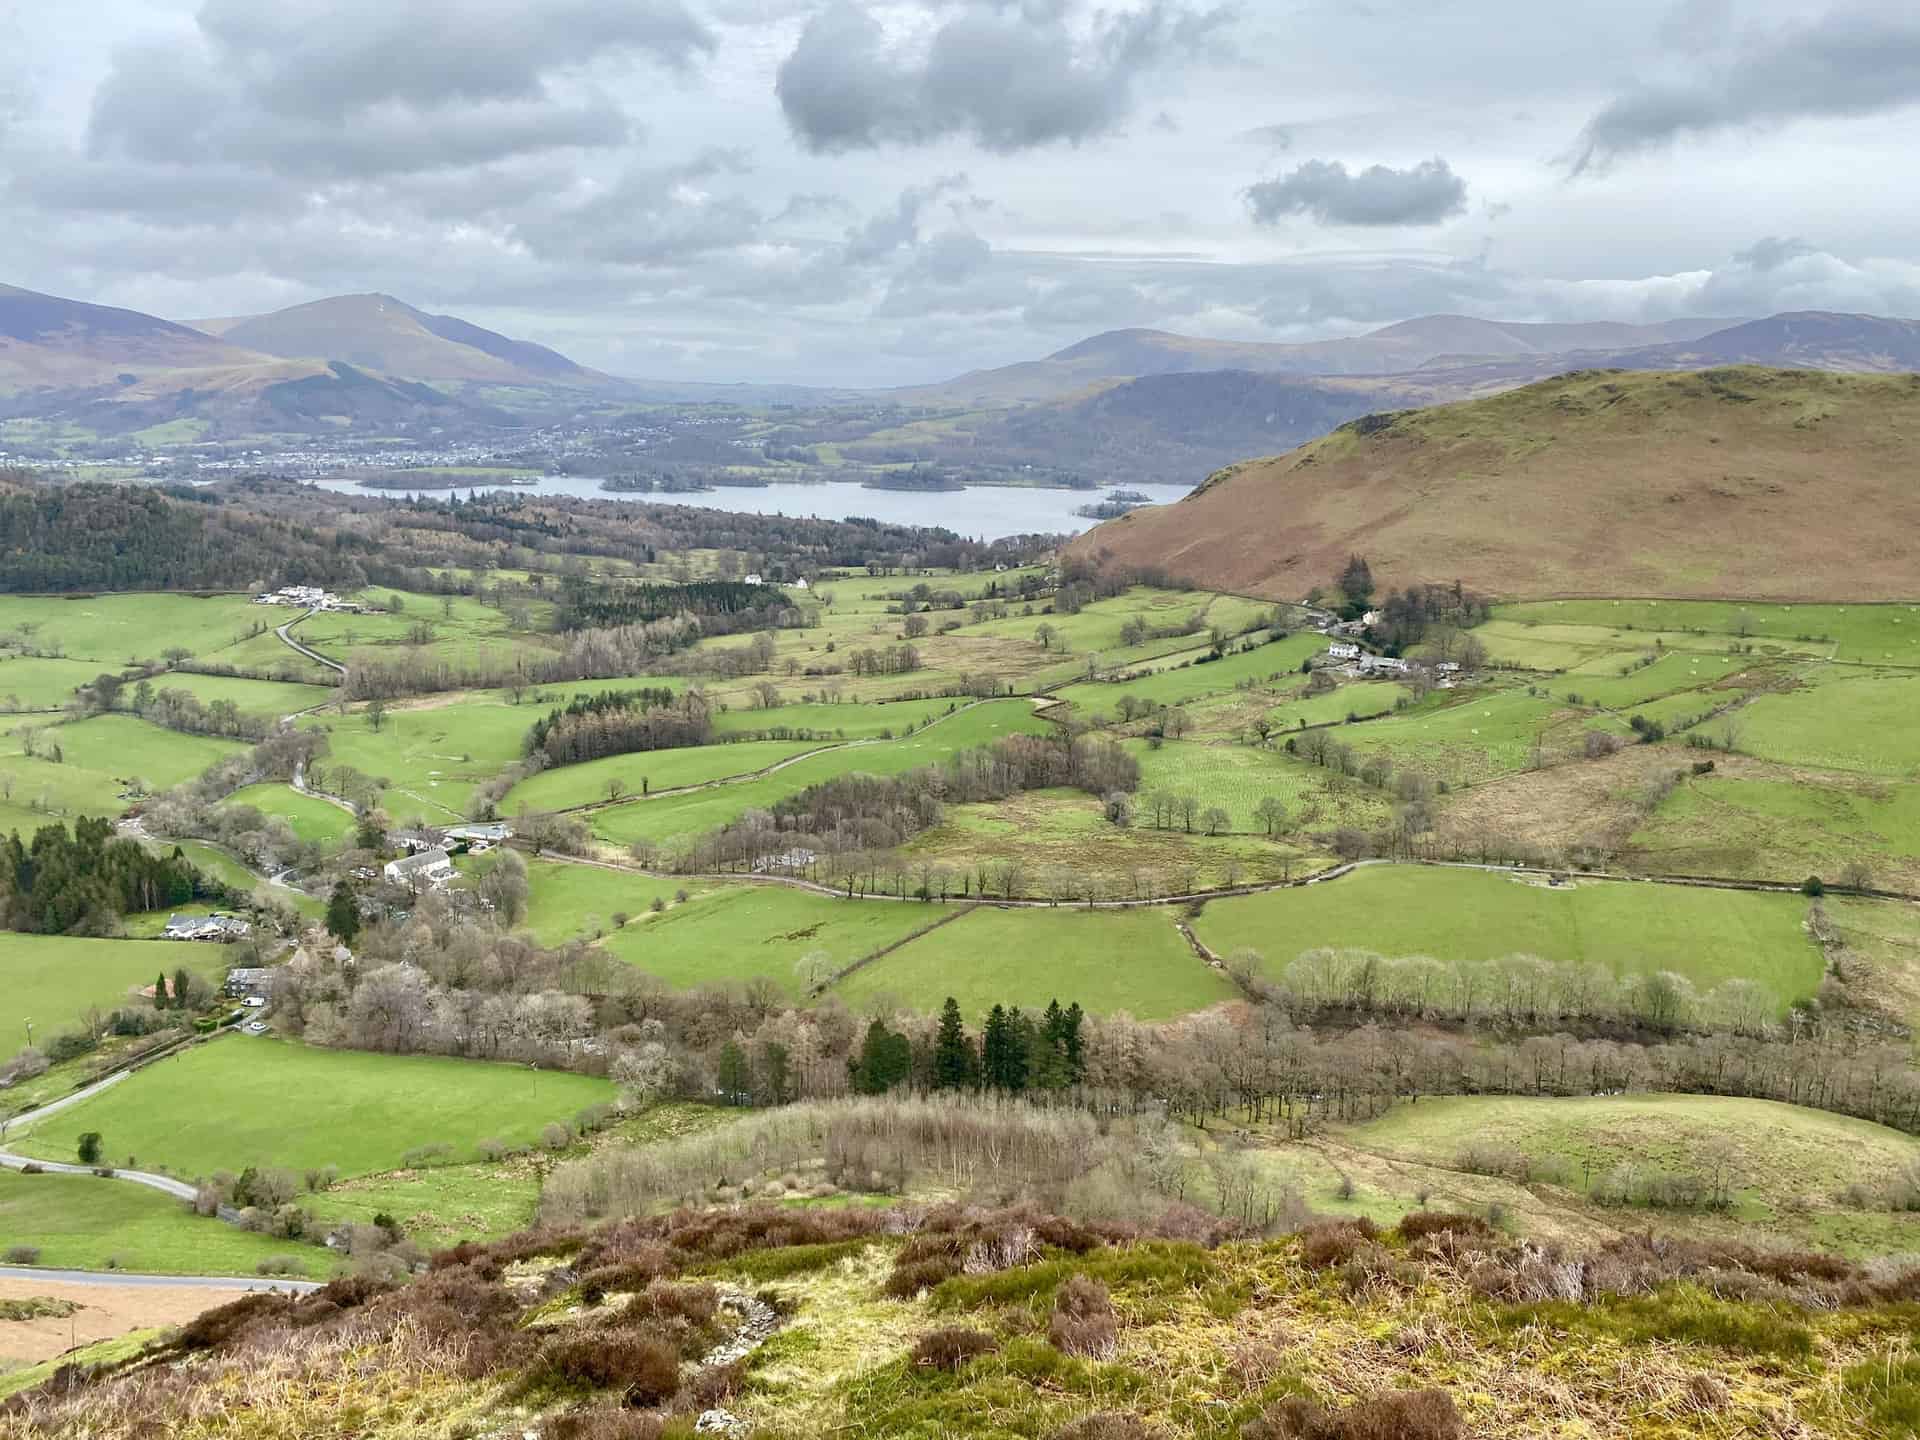 The view north-east from the flanks of Rowling End across the Newlands valley towards Derwent Water.